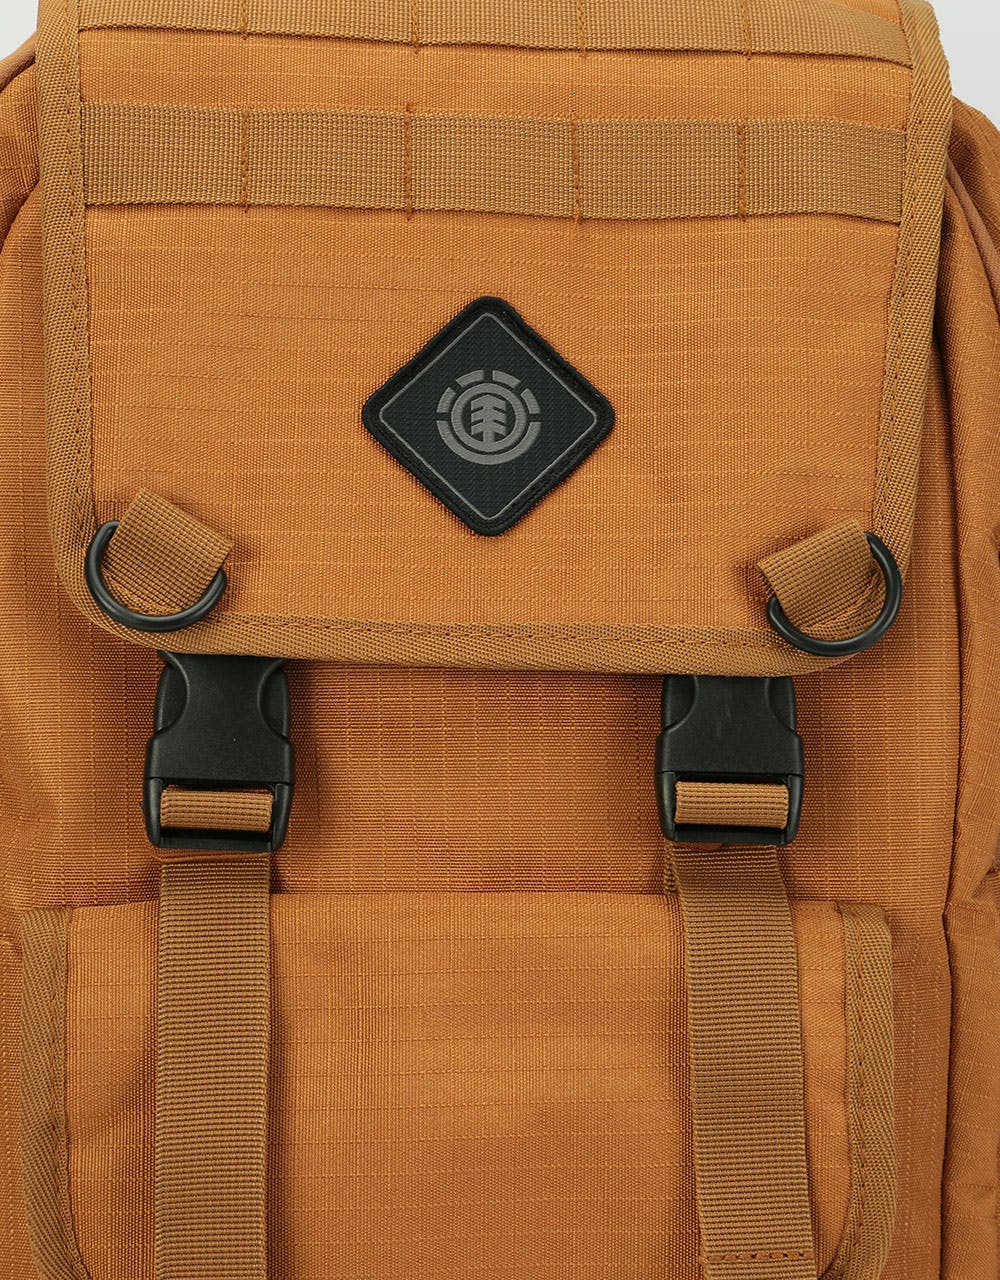 Element Cypress Recruit Backpack - Bronco Brown